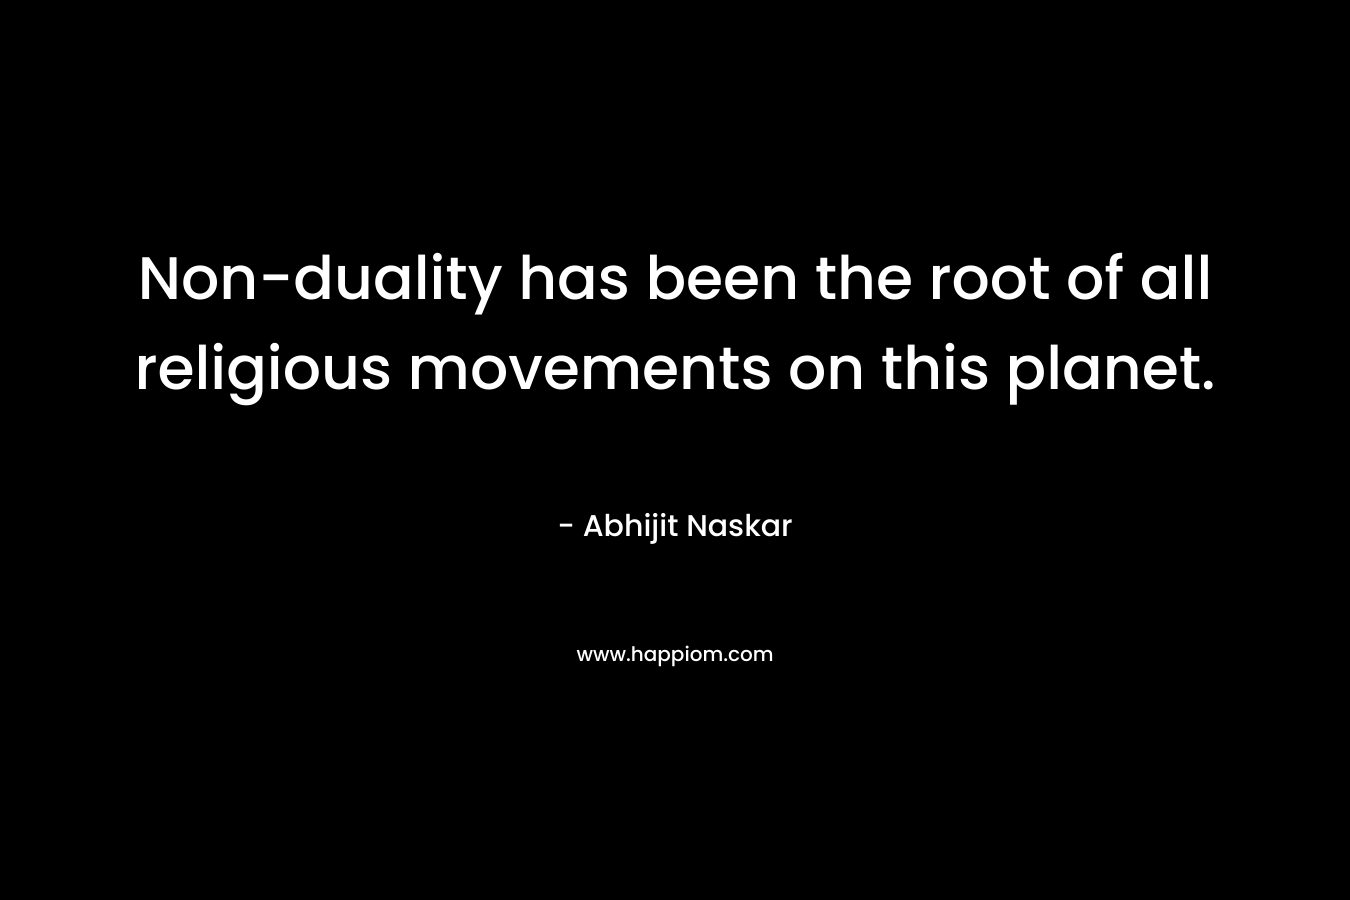 Non-duality has been the root of all religious movements on this planet. – Abhijit Naskar